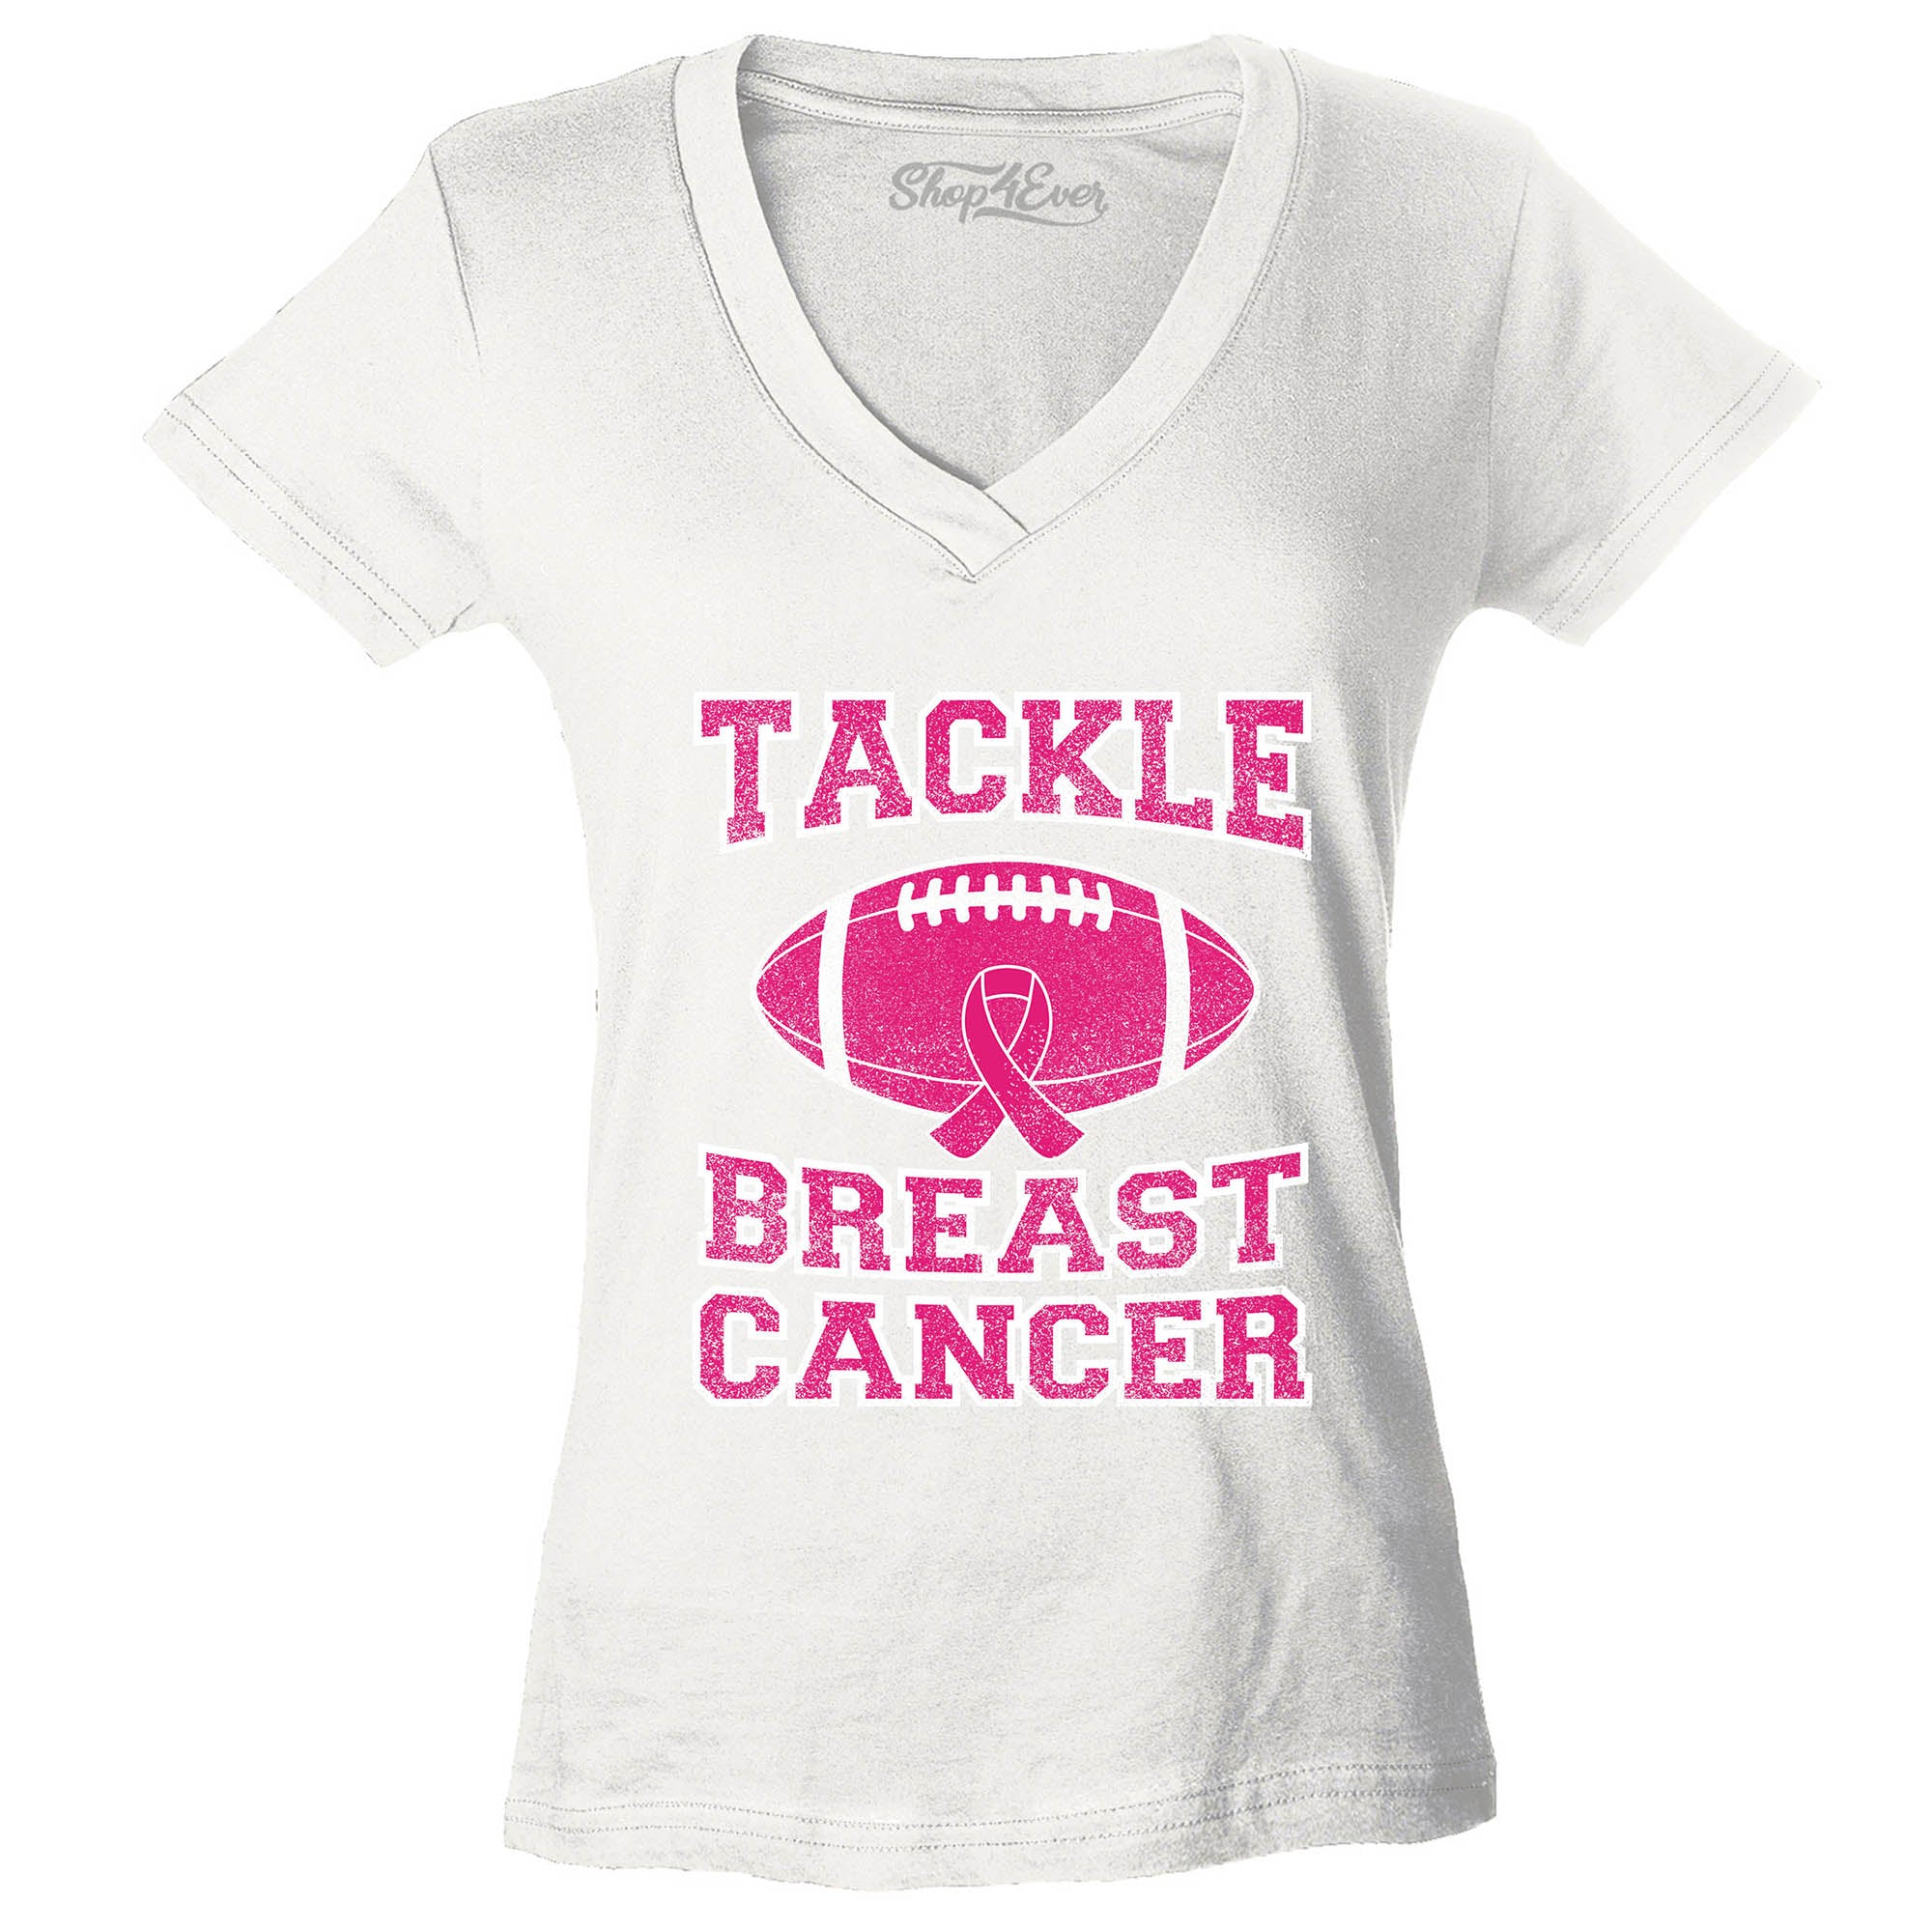 Tackle Breast Cancer Women's V-Neck T-Shirt Support Awareness Shirts Slim FIT